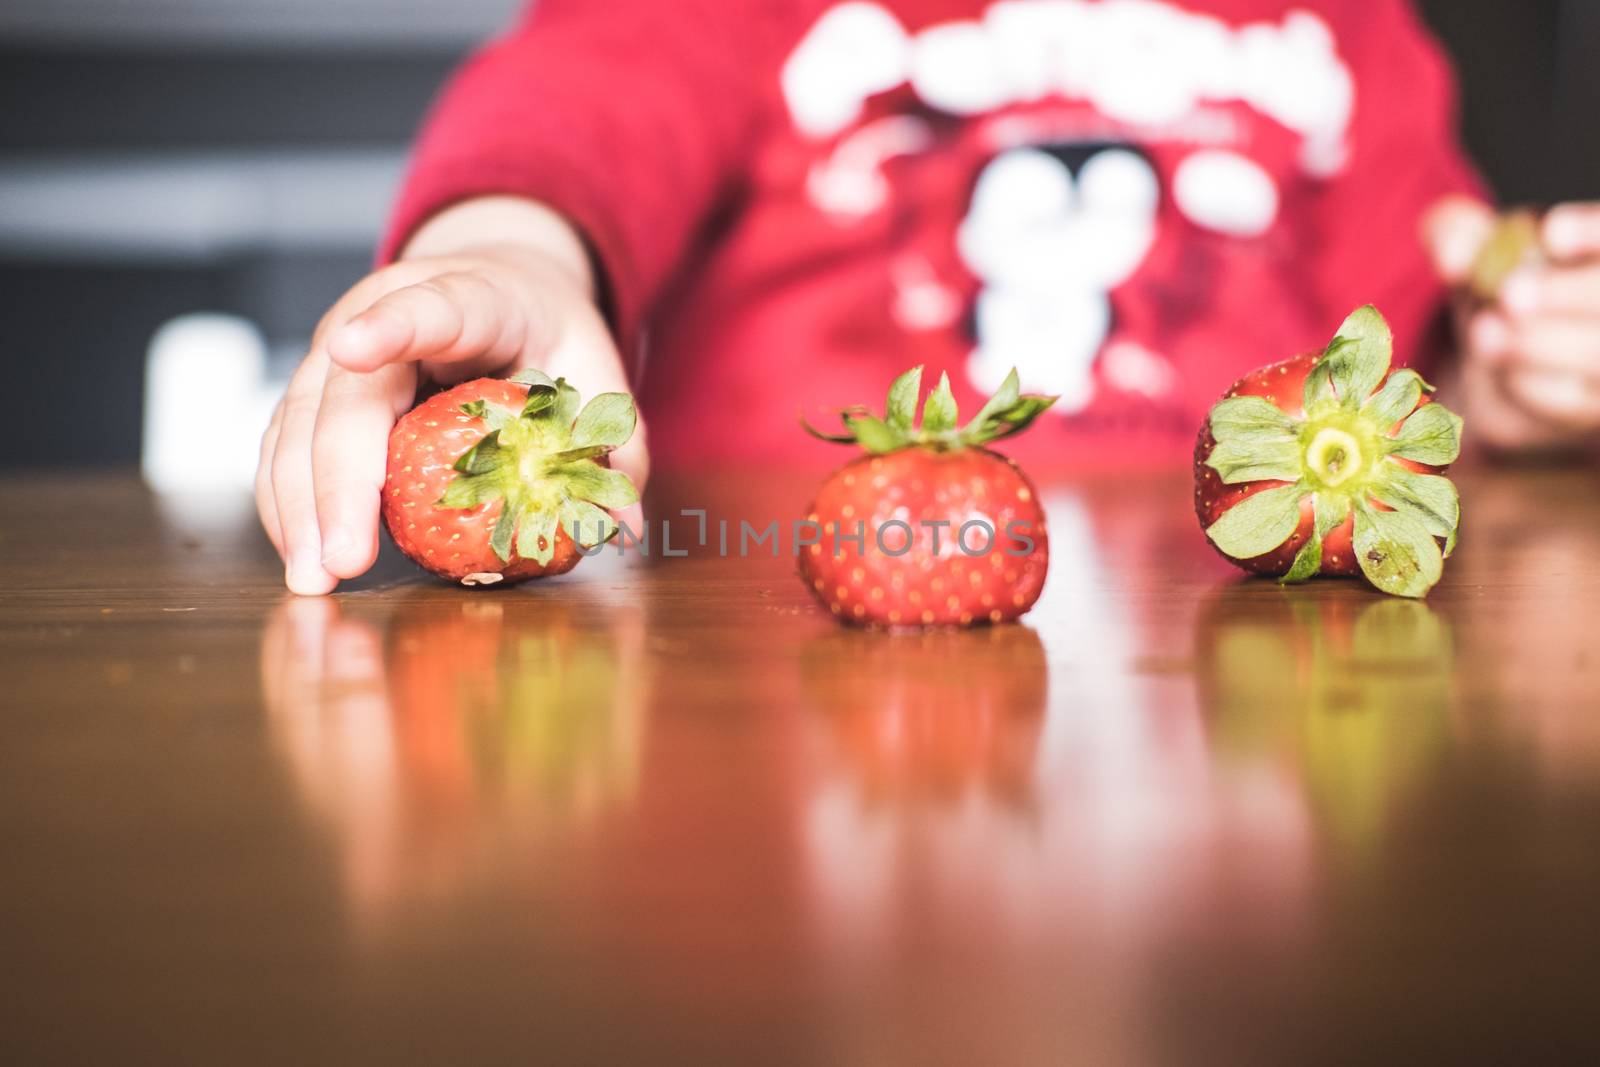 One of the strawberries forming a line on the table is being grabbed by a kid